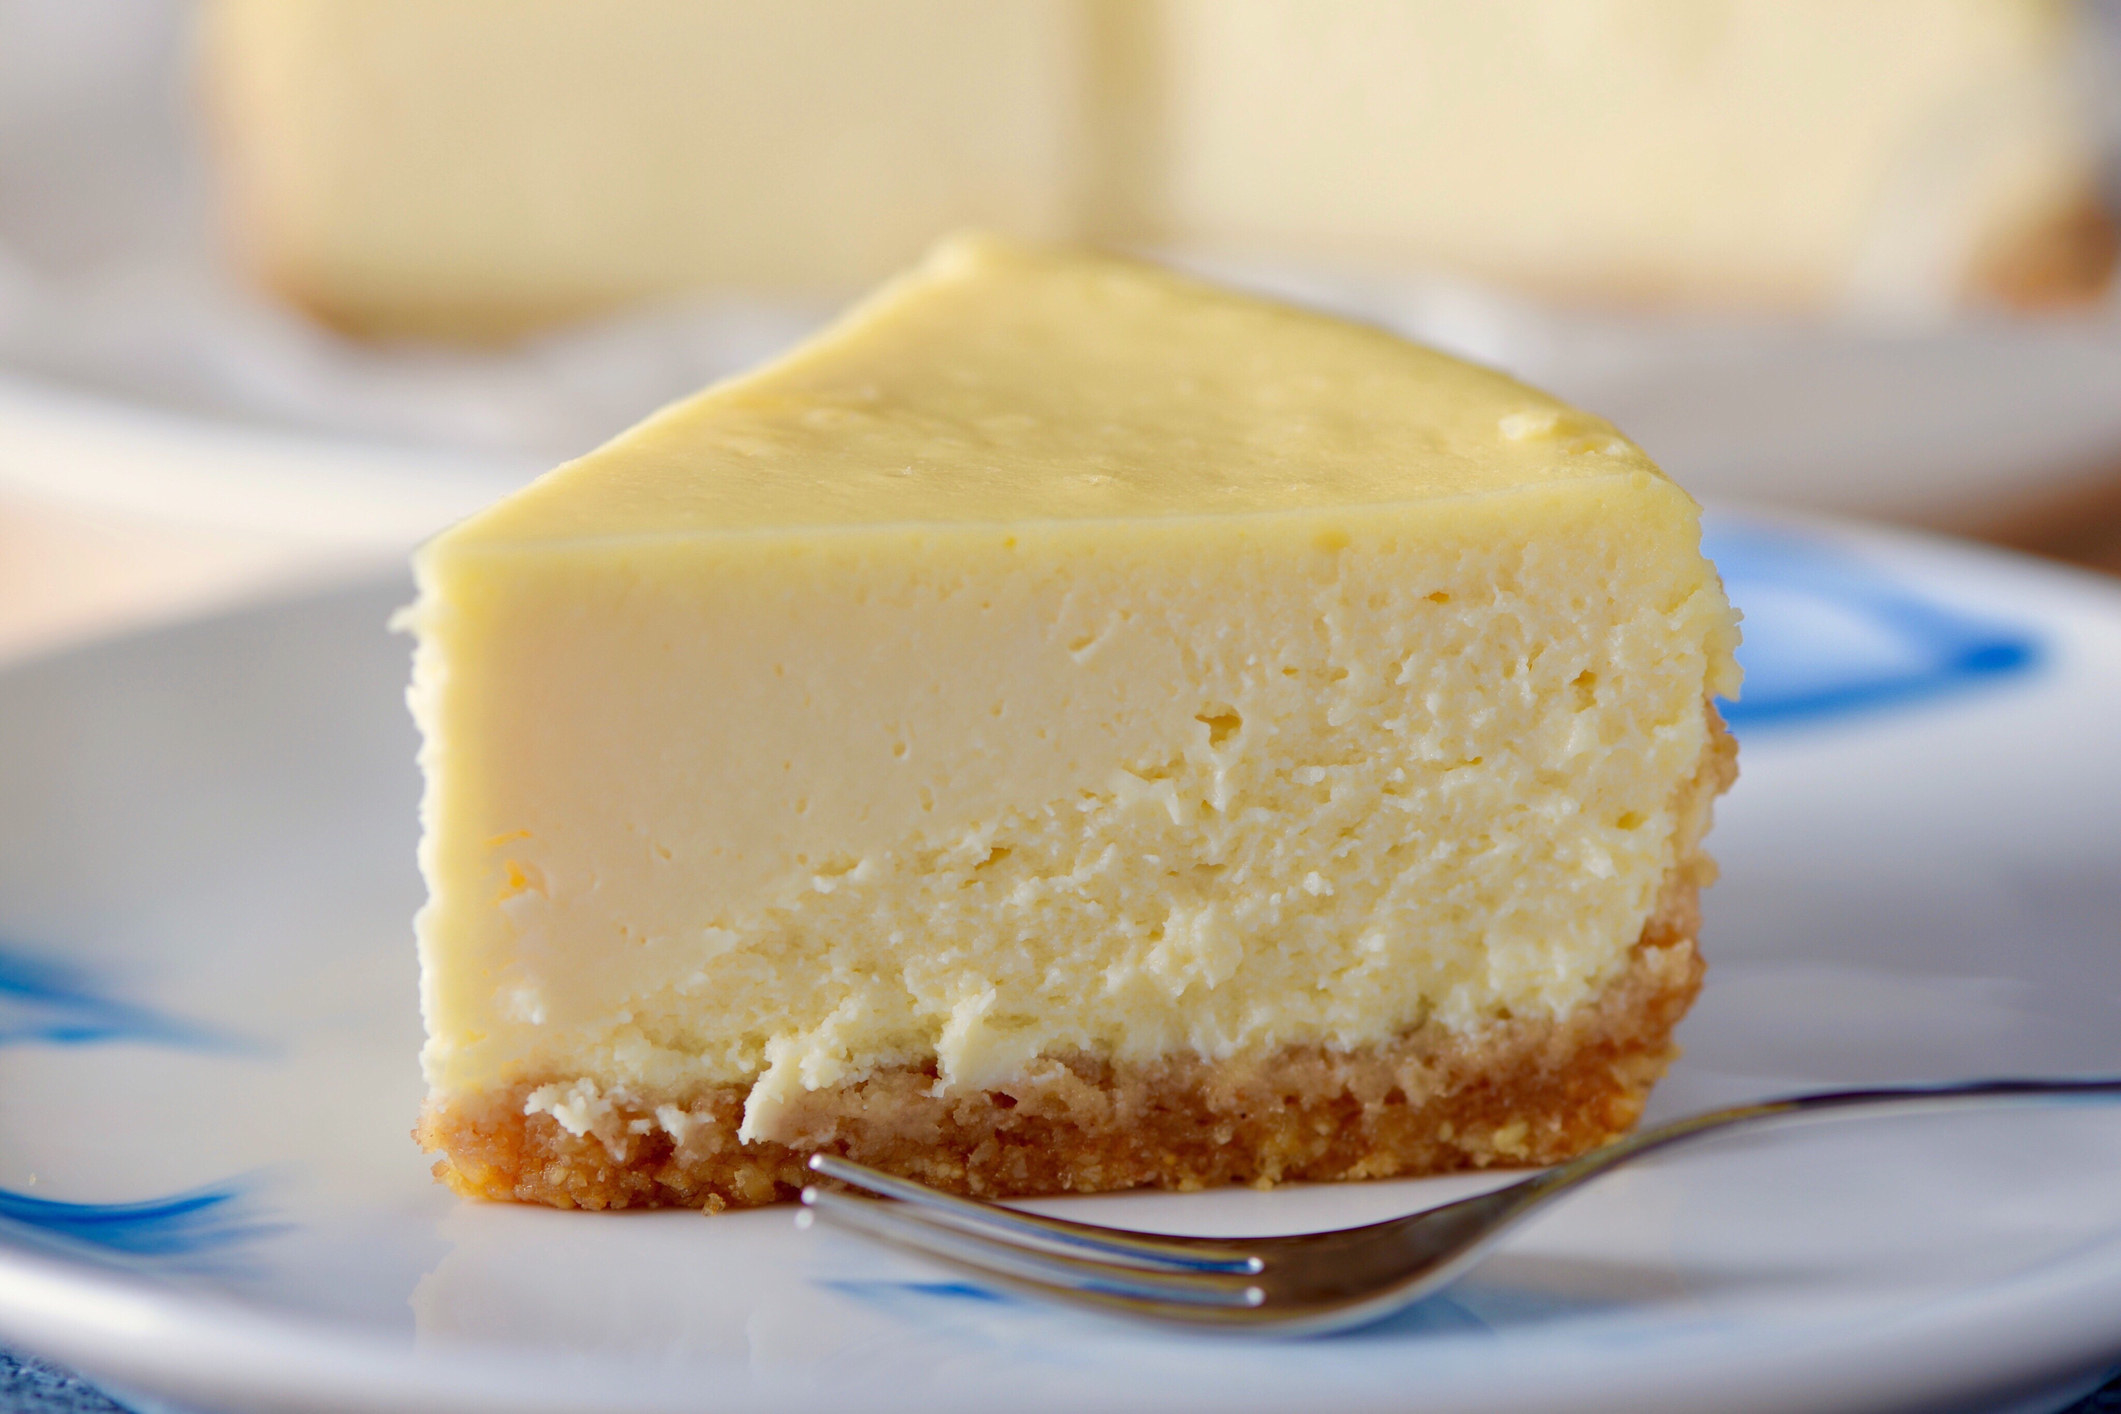 A slice of cheesecake.